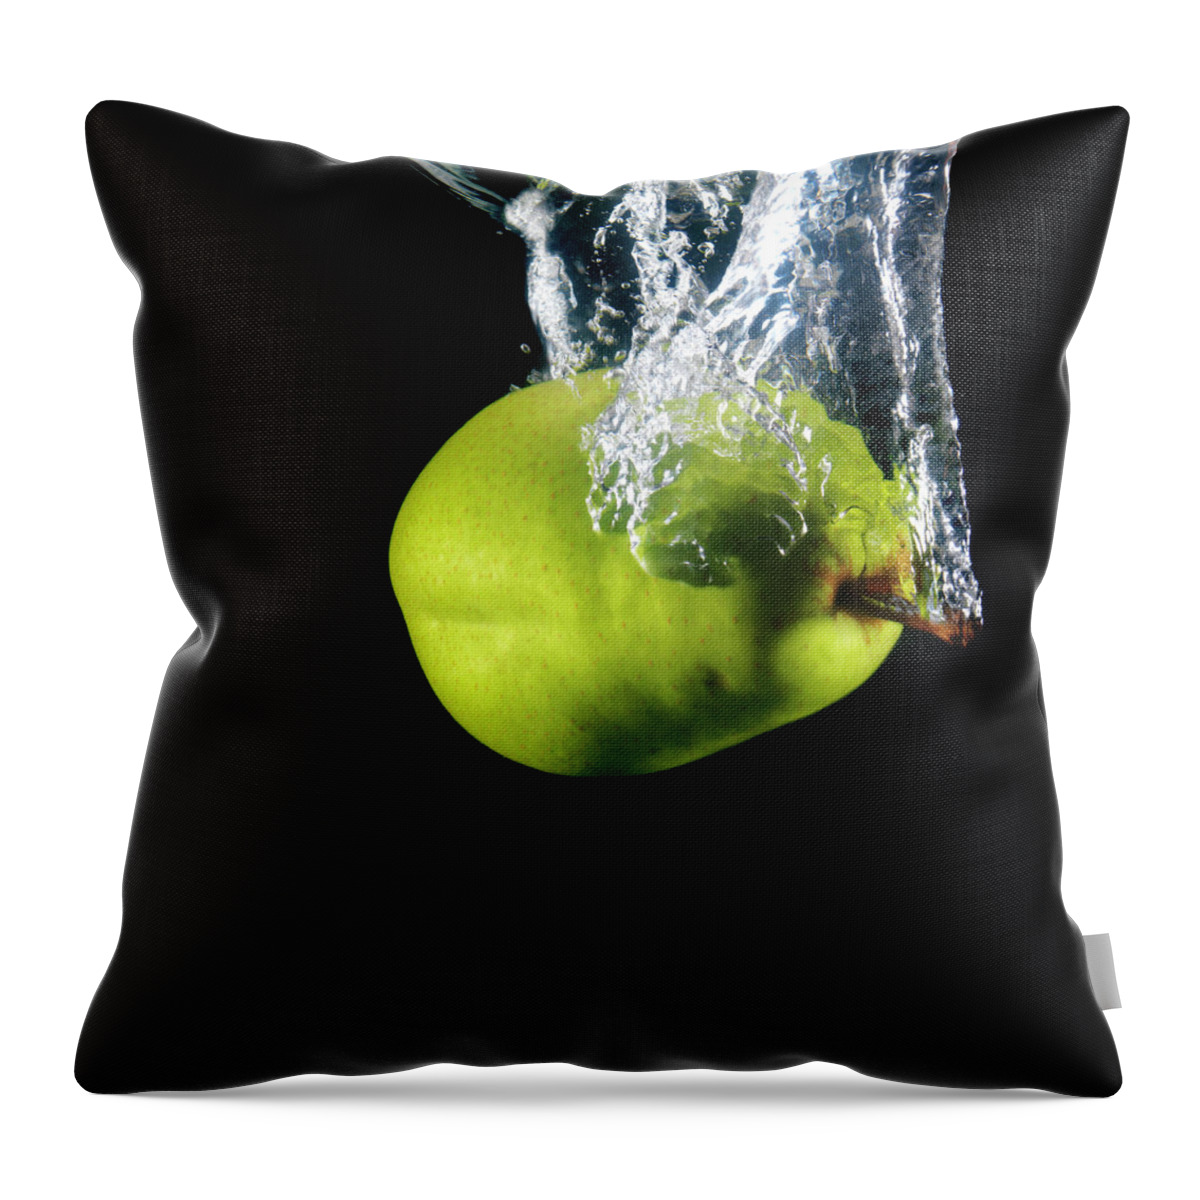 Black Background Throw Pillow featuring the photograph Green Pear Sinking In Water by Henrik Sorensen